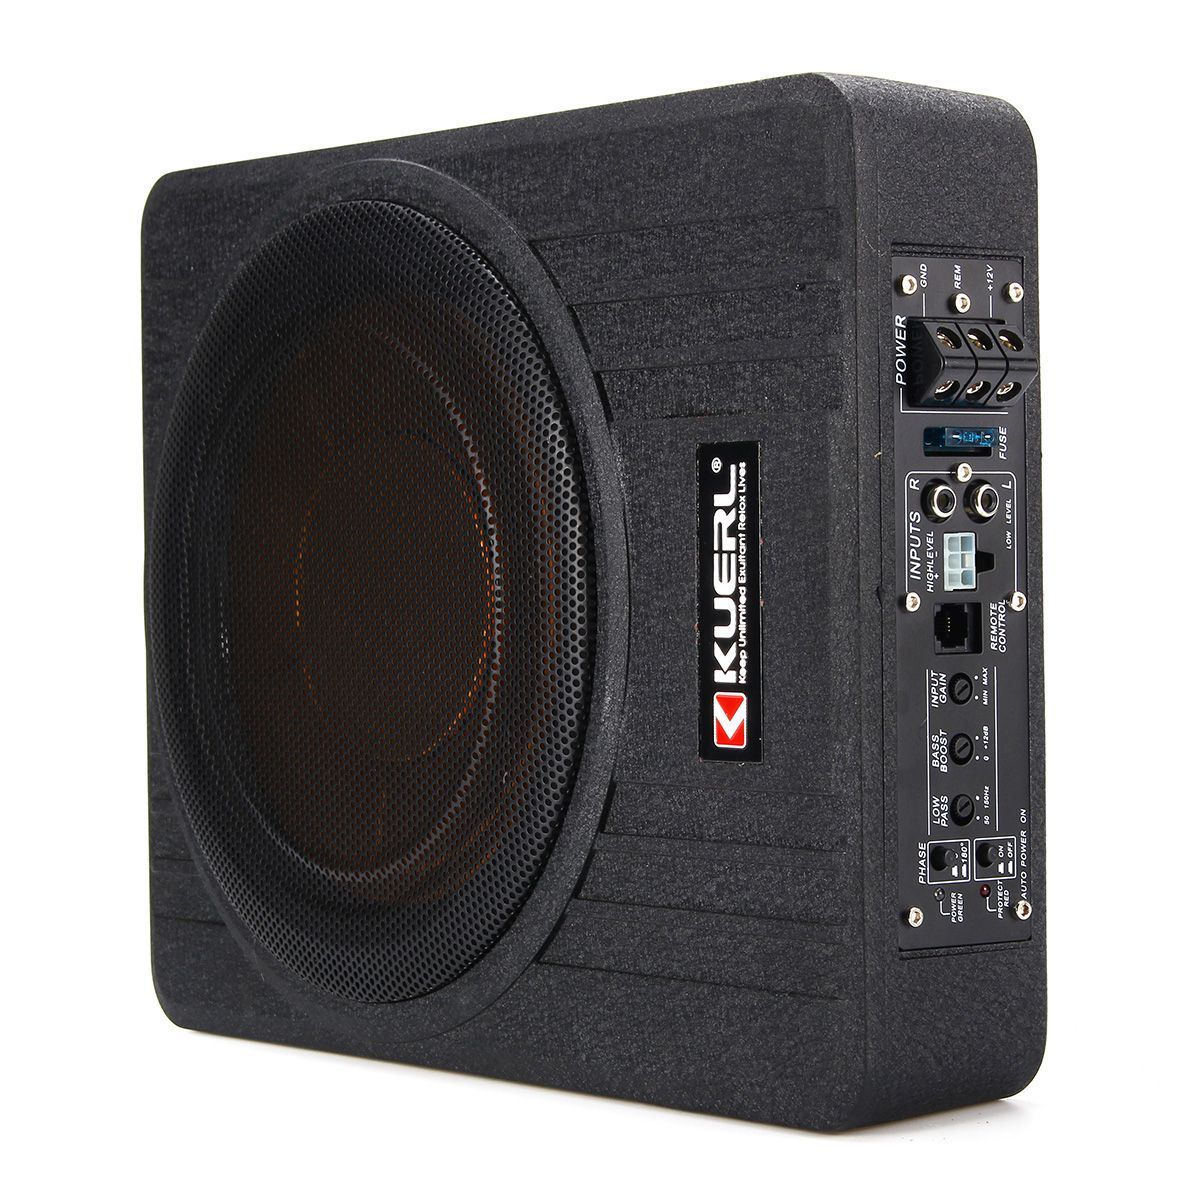 600W-10-Inch-12V-Car-Under-Seat-Active-Amplifier-Subwoofer-Slim-Speaker-Amplifier-with-Remove-Contro-1385327